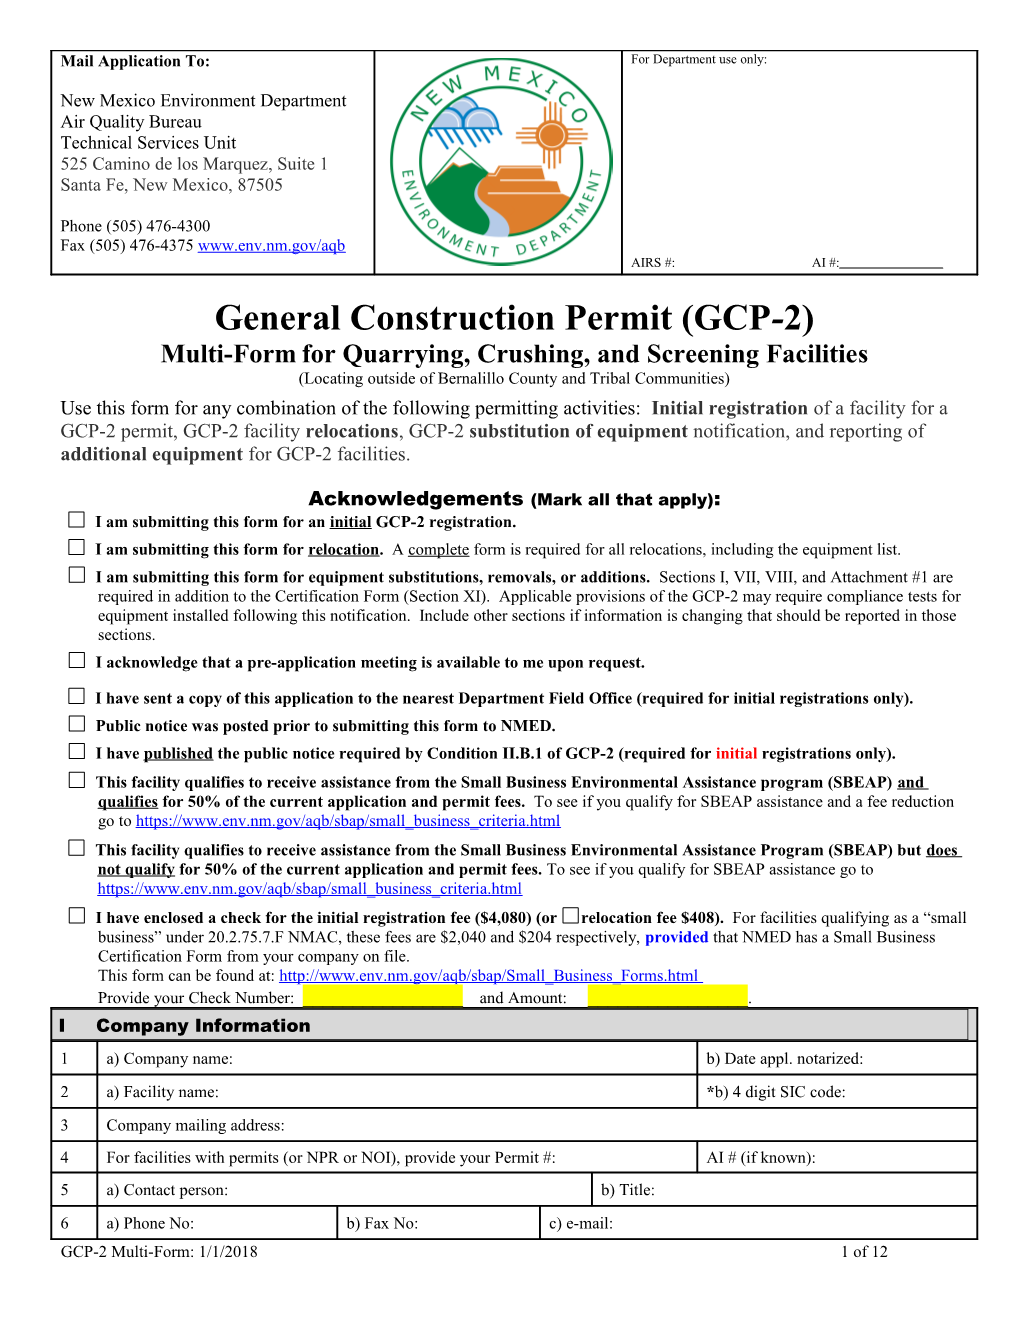 I Am Submitting This Form for an Initial GCP-2 Registration s1